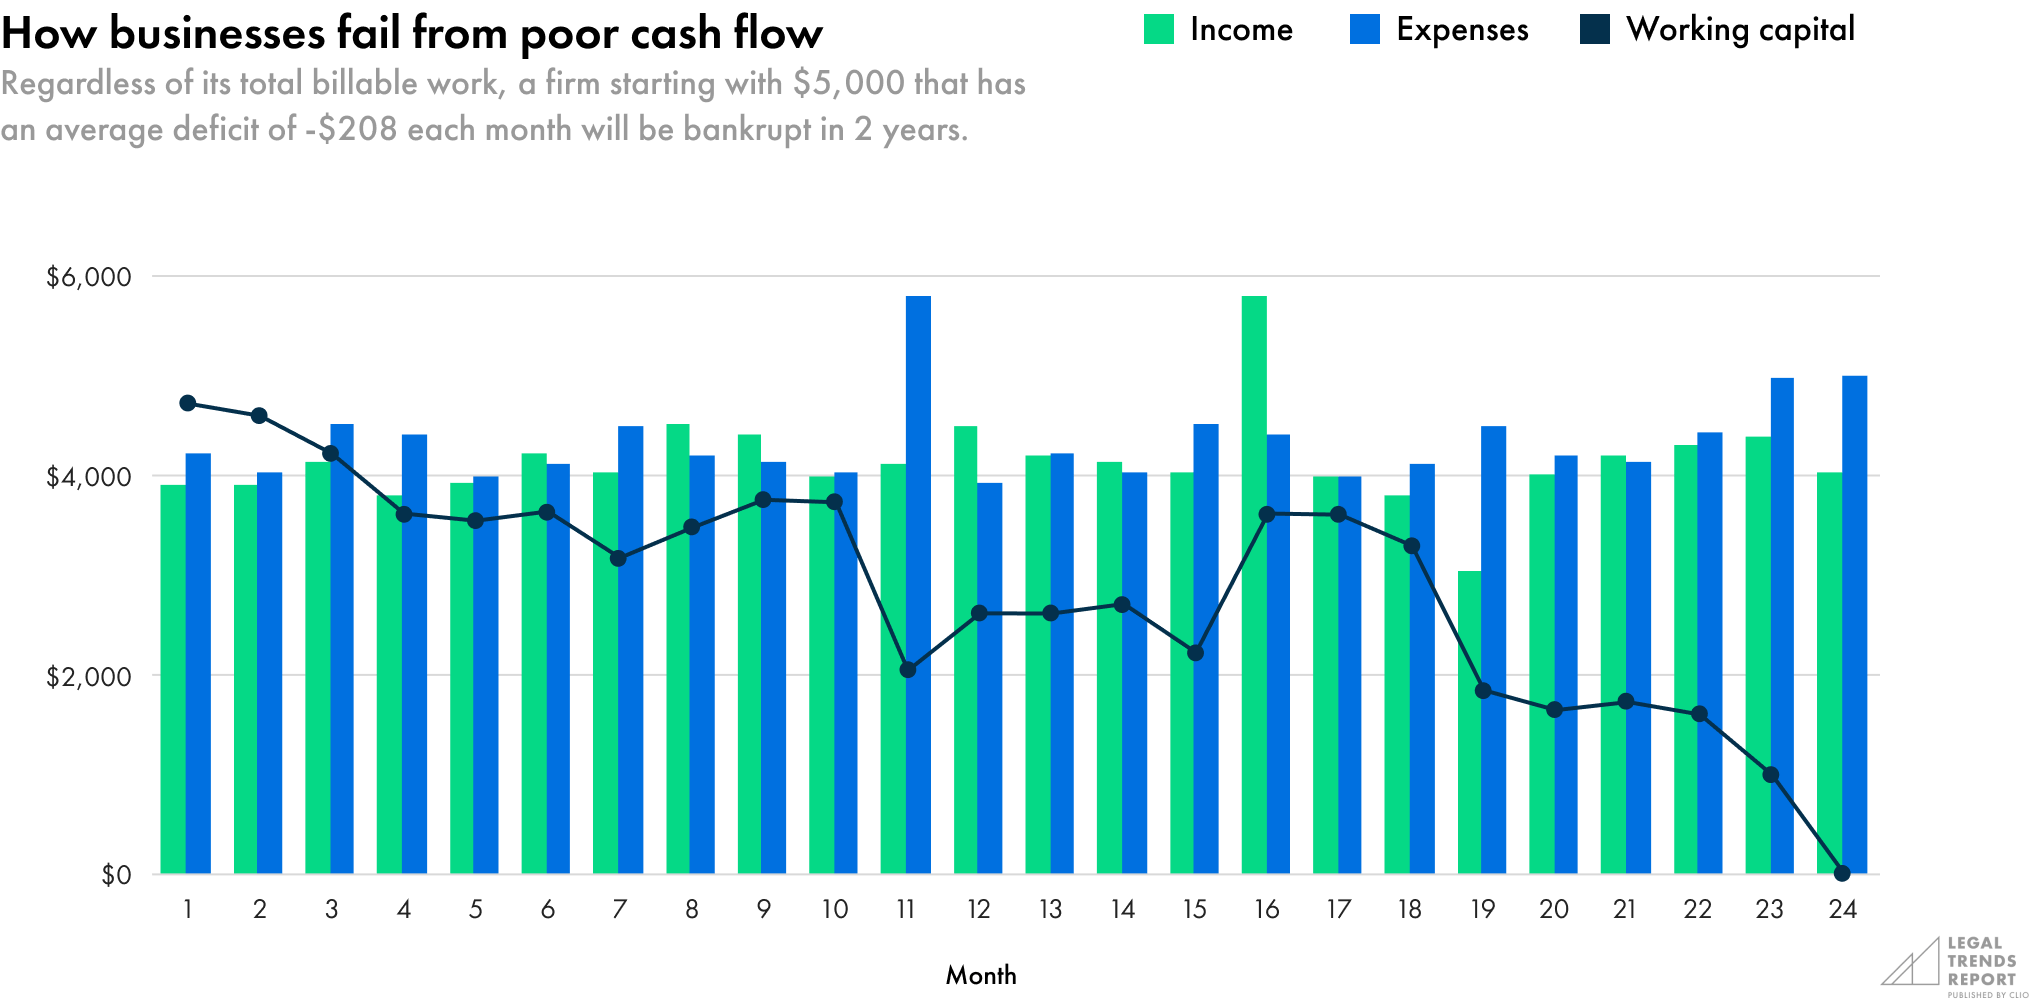 How businesses fail from poor cash flow